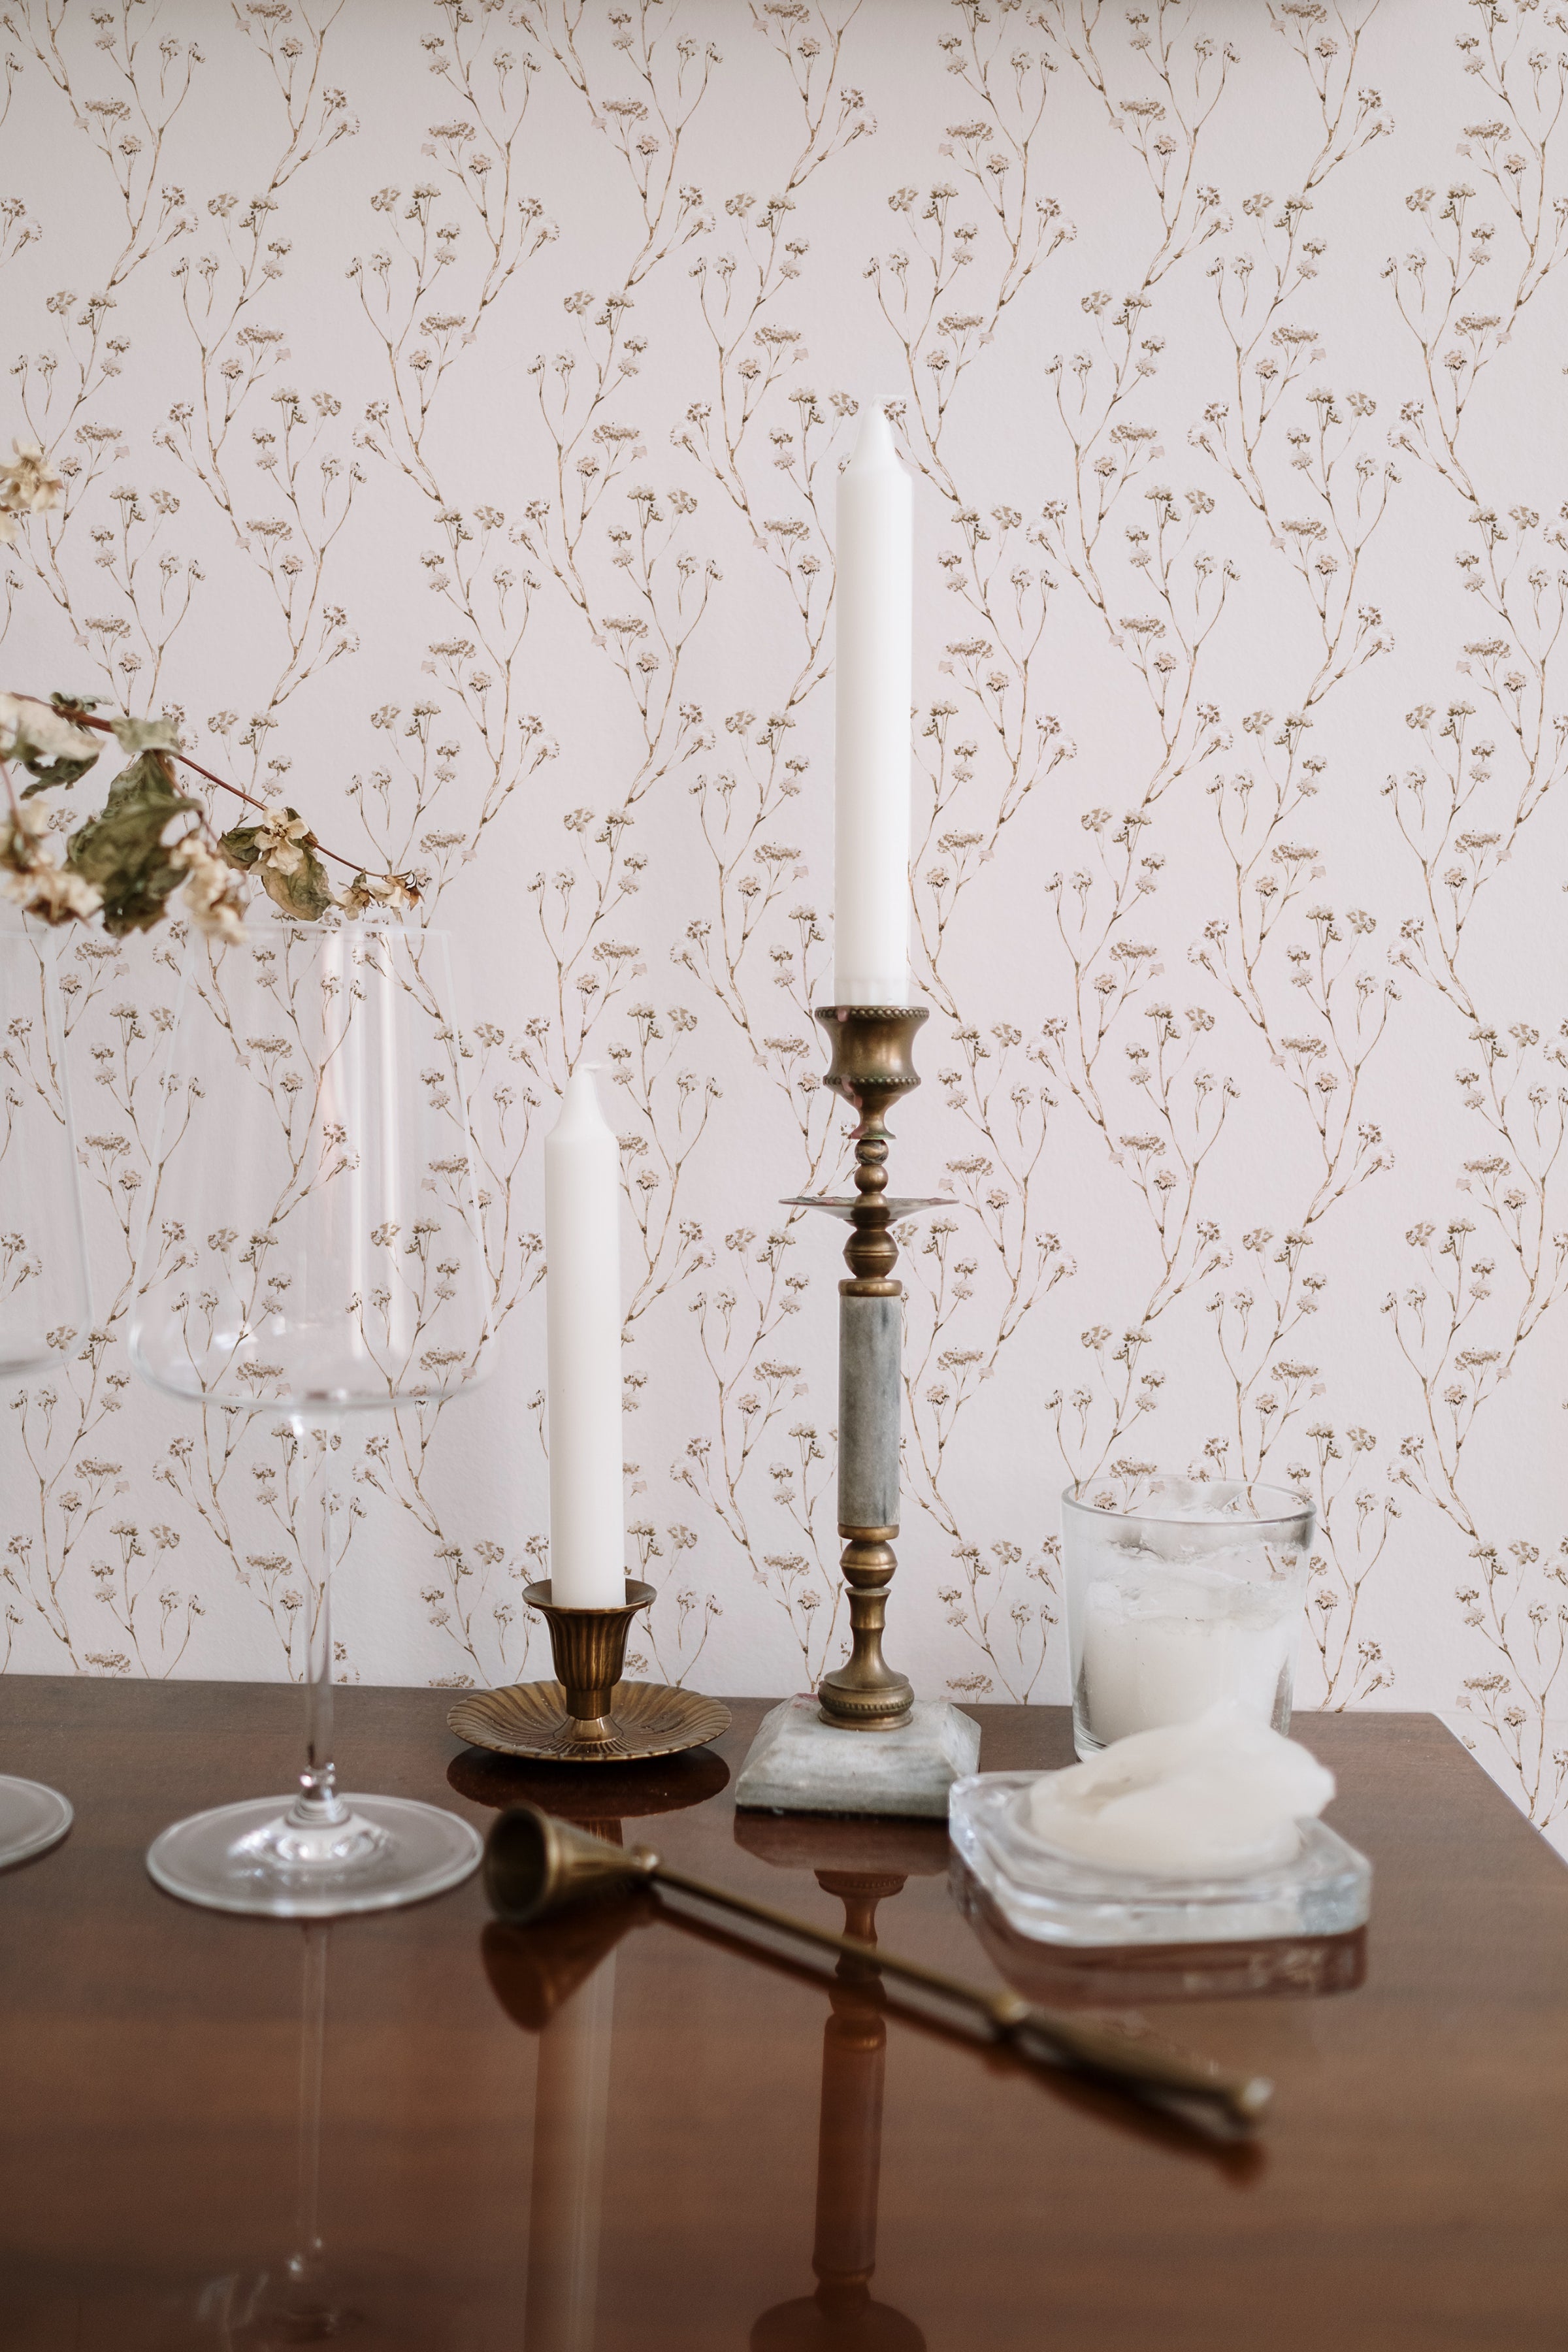 The 'Boho Branches Wallpaper' adds a touch of natural sophistication to a dining area, with tall candles and crystal glassware enhancing the elegance of the setting.